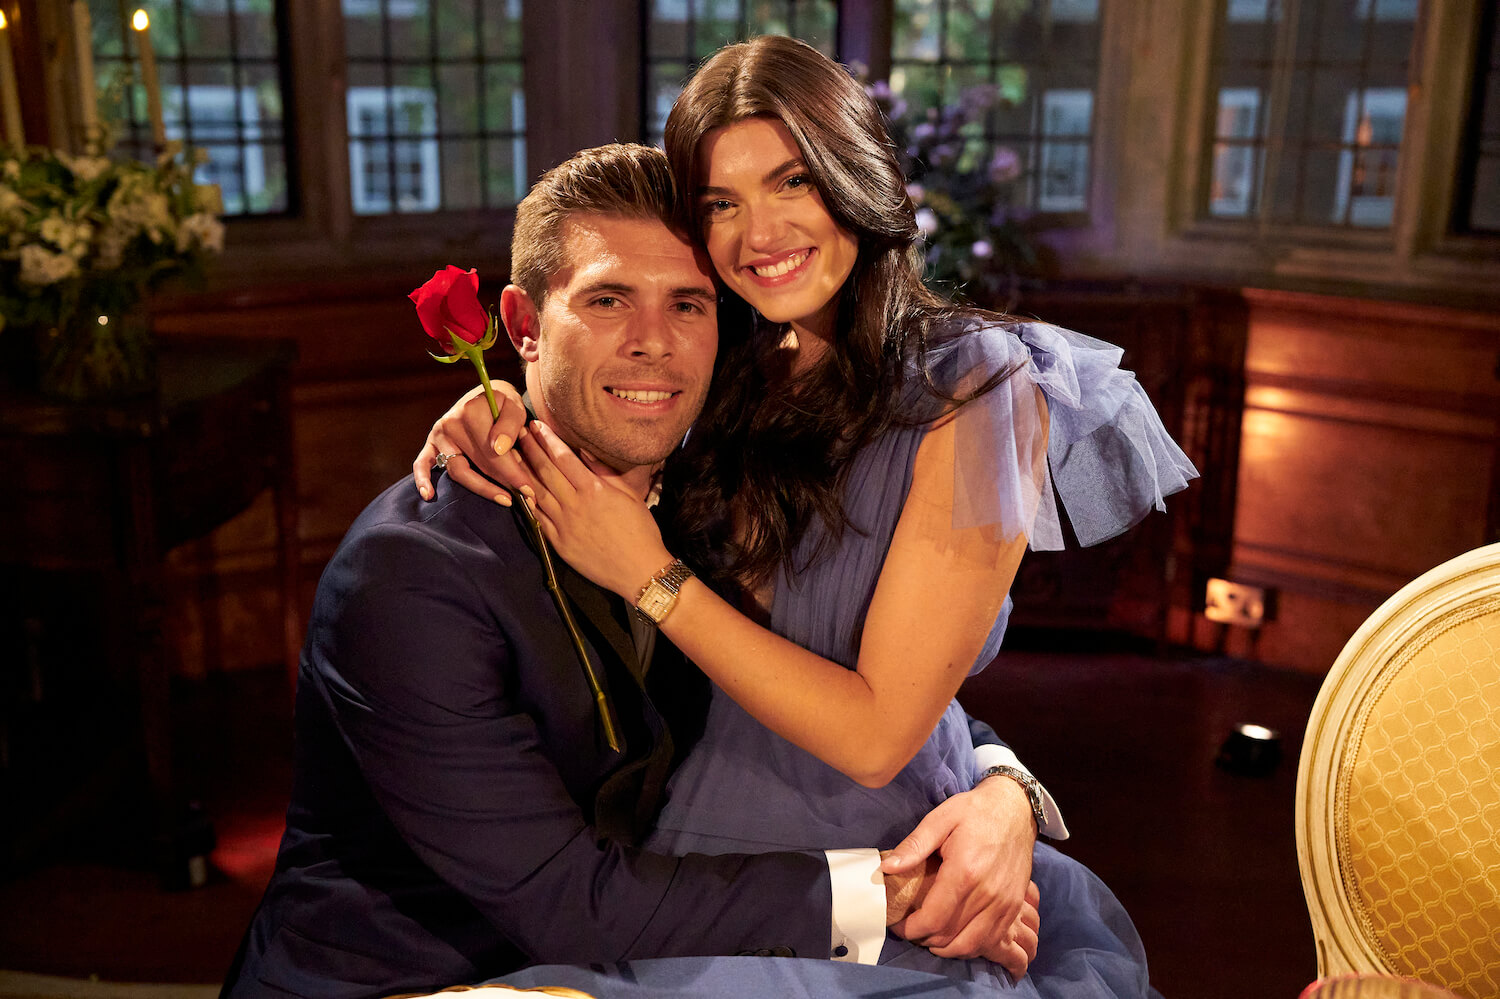 'The Bachelor' Season 27 finale runner-up Gabi Elnicki sitting on Zach Shallcross's lap while smiling and holding a rose